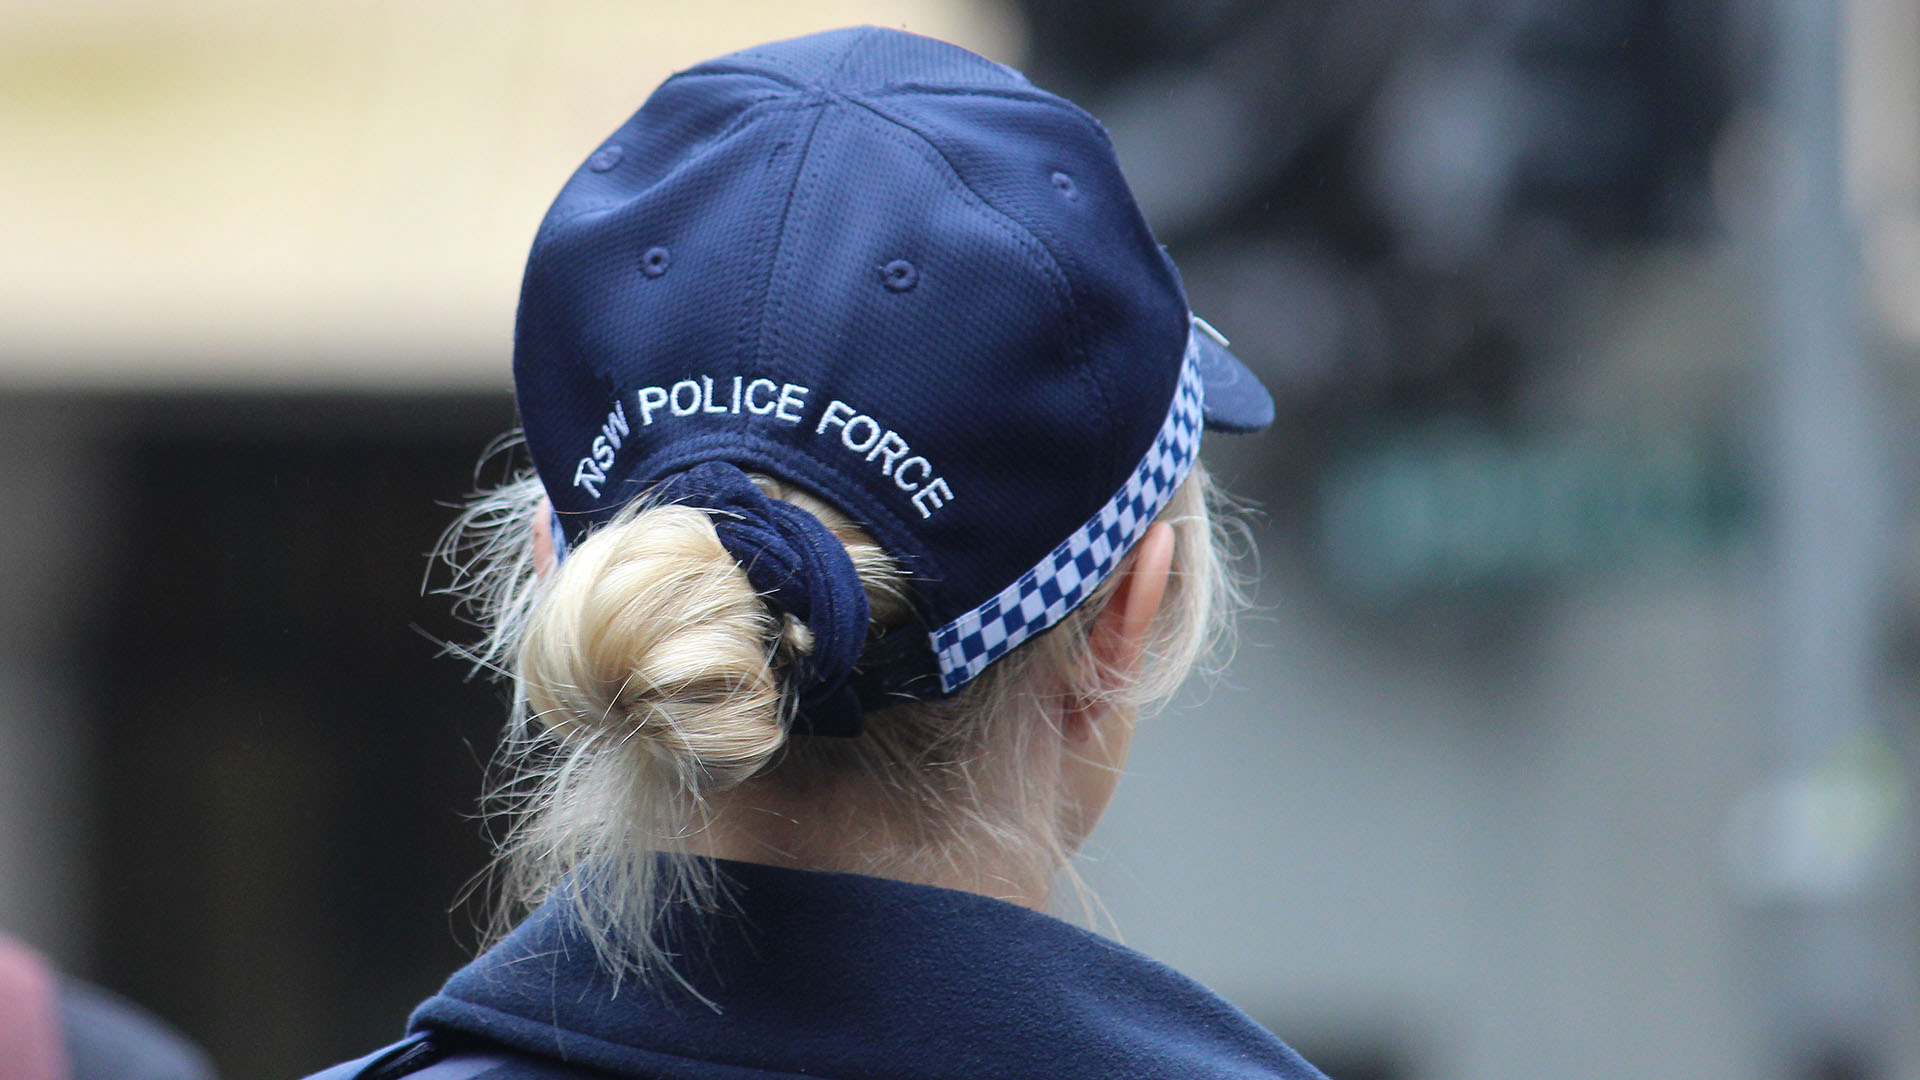 A female NSW police officer, photographed from behind